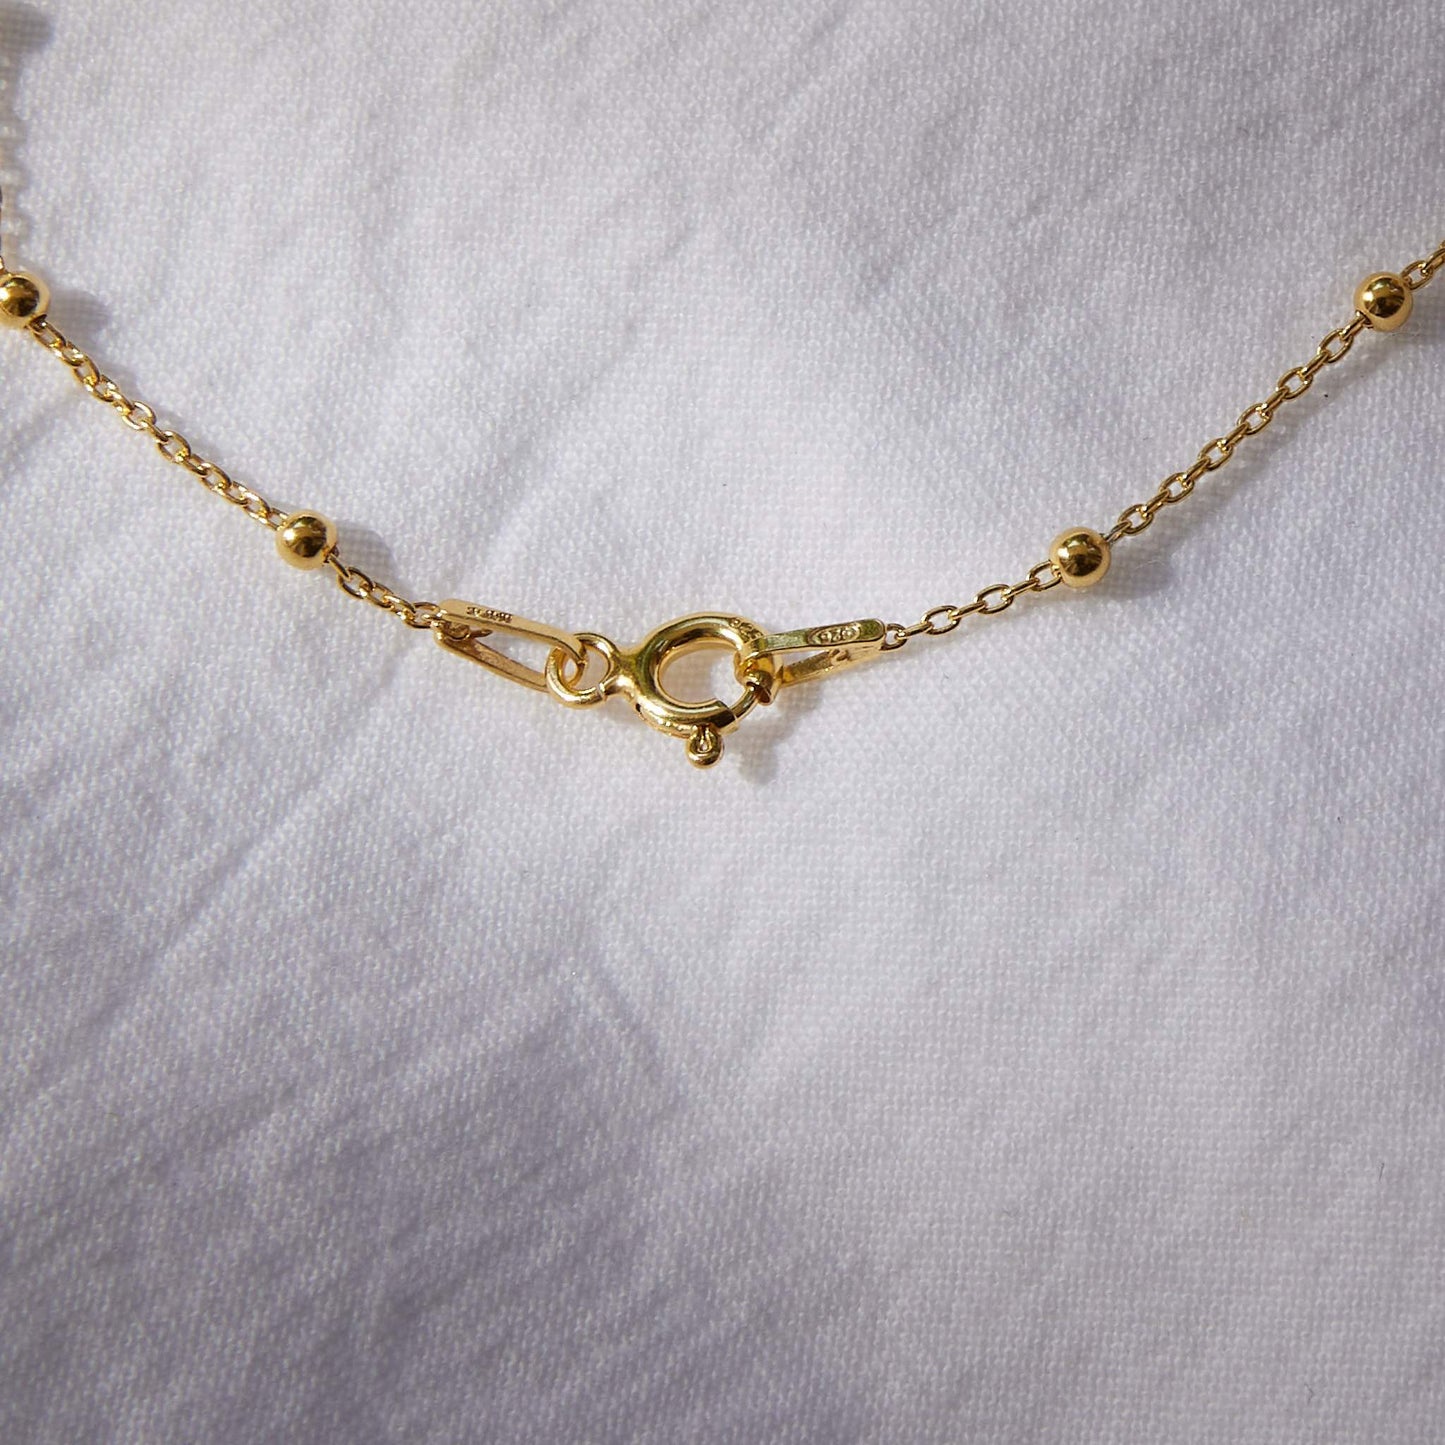 11:11 pendant on 24k Gold Plated Sterling Silver ball chain